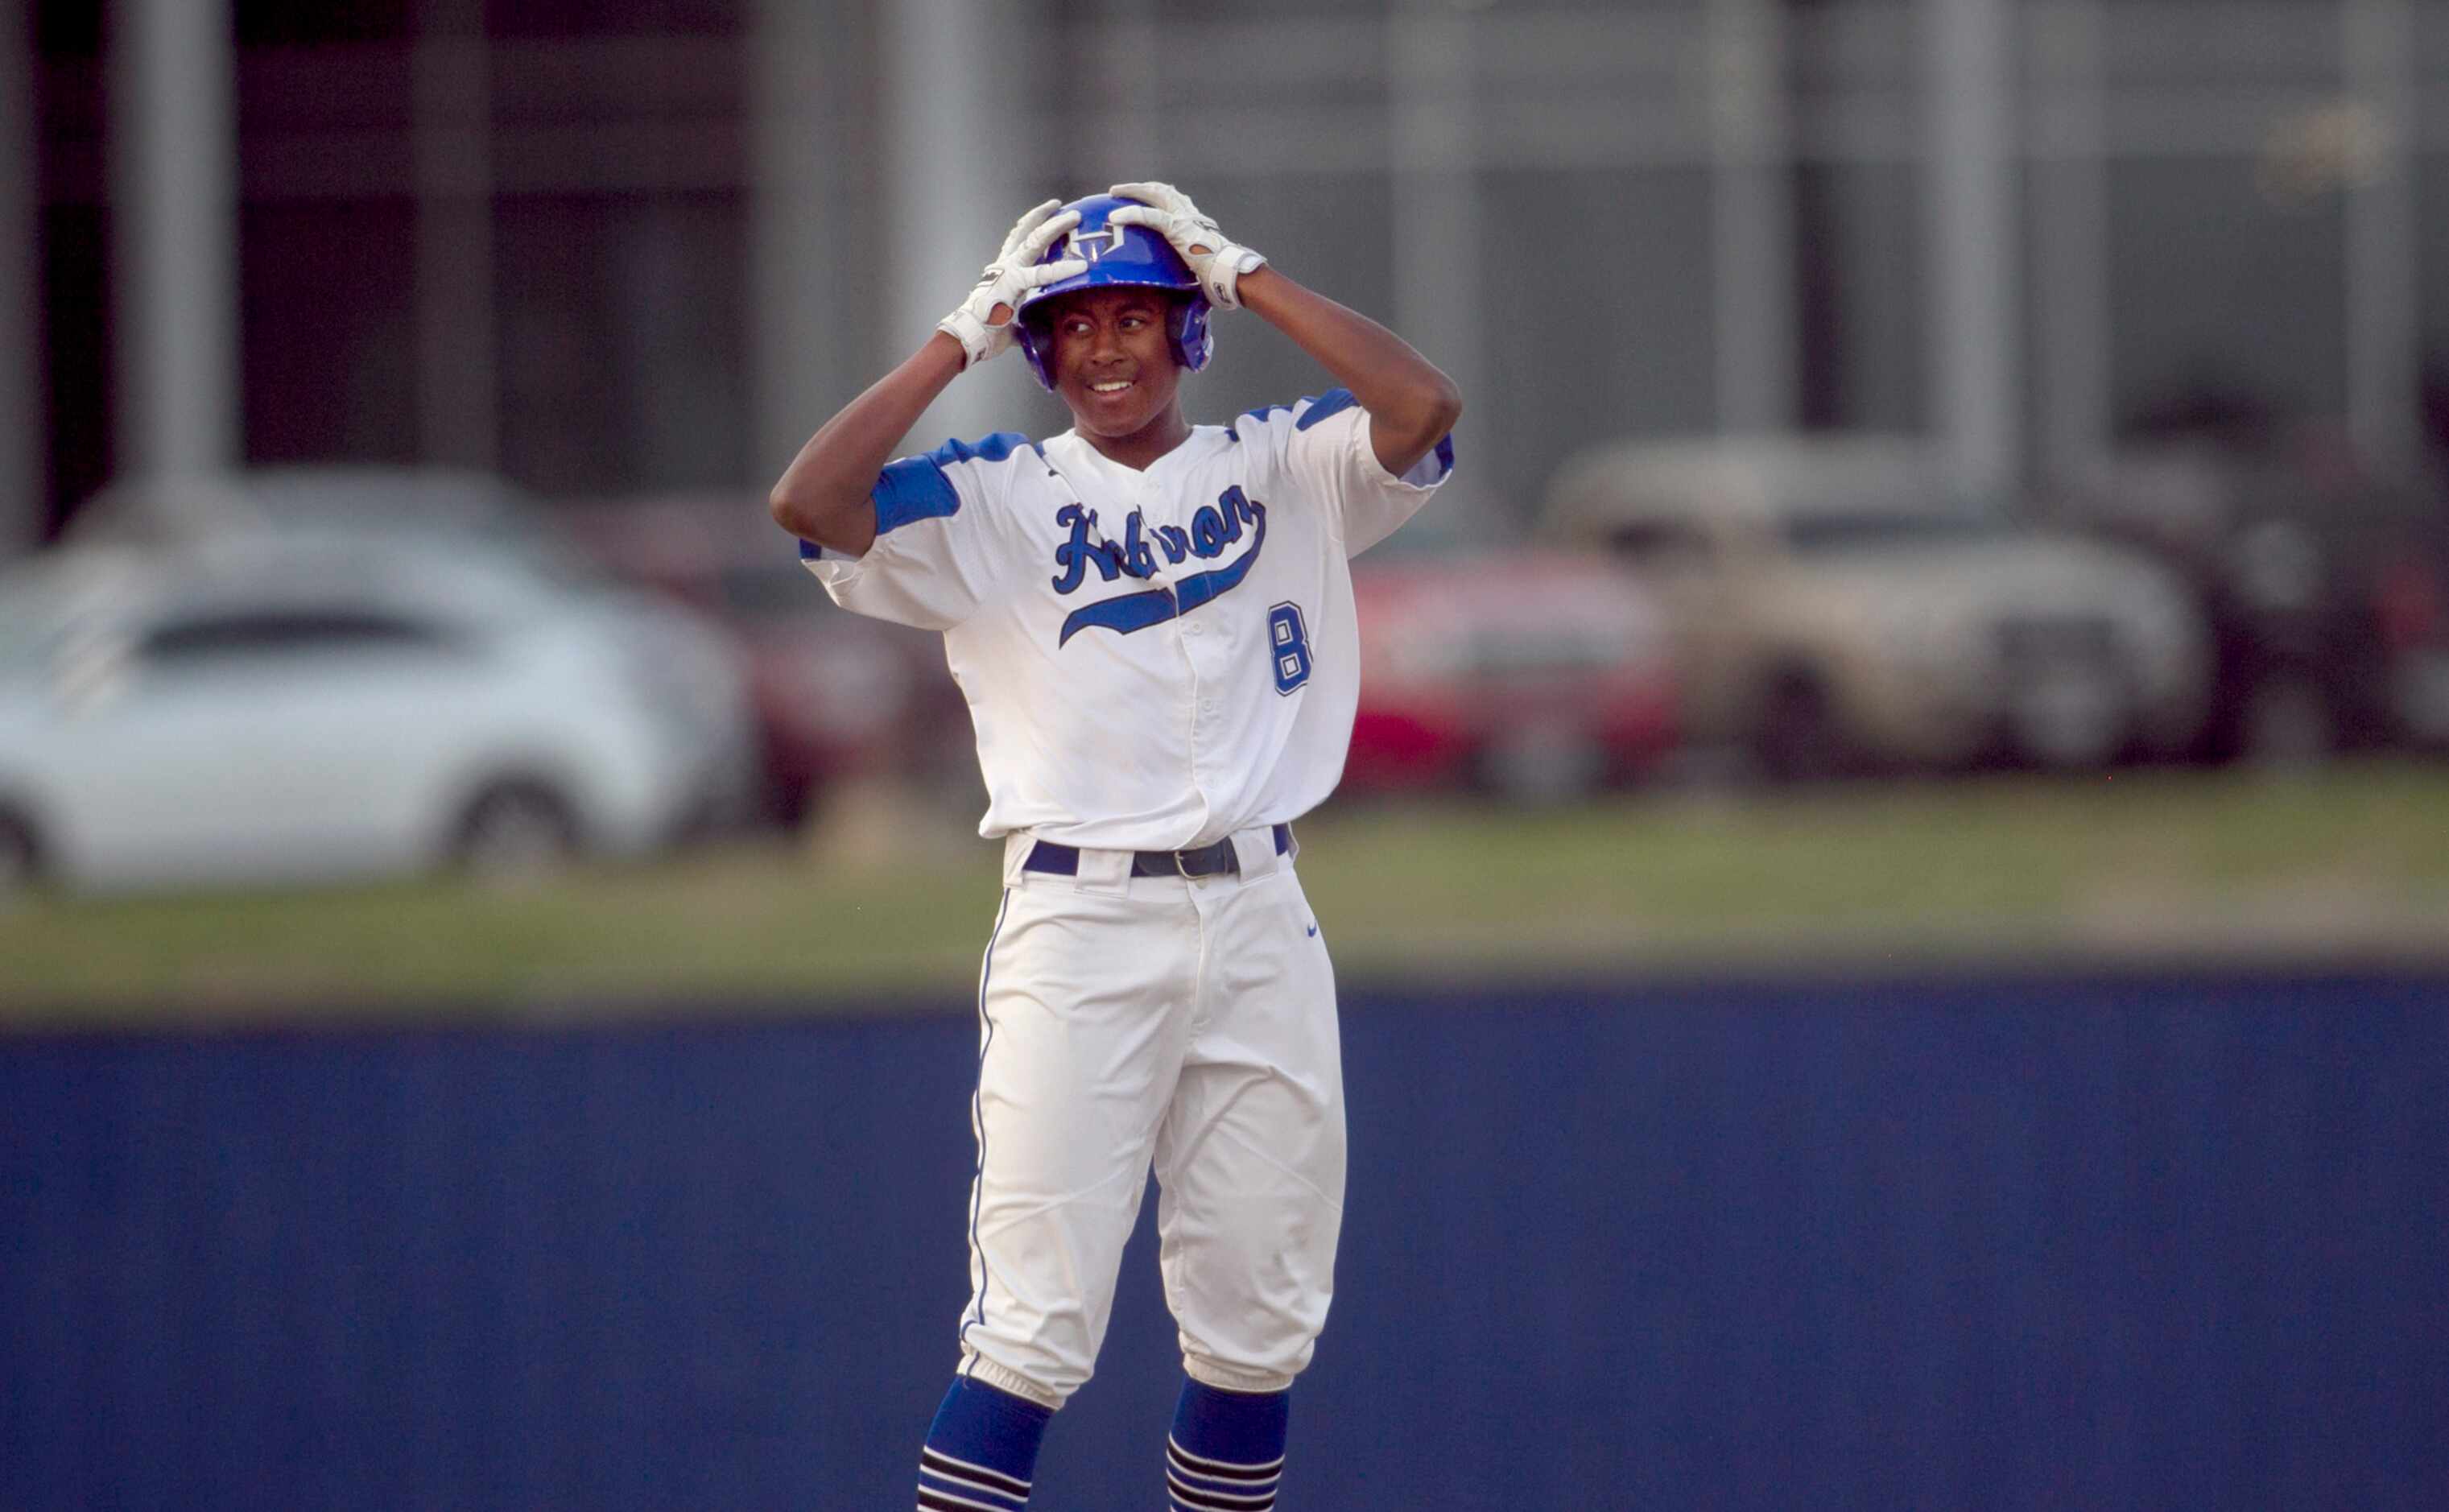 Hebron's Aden Howard (8) reacts to the roar from the Hawks dugout following his stand-up...